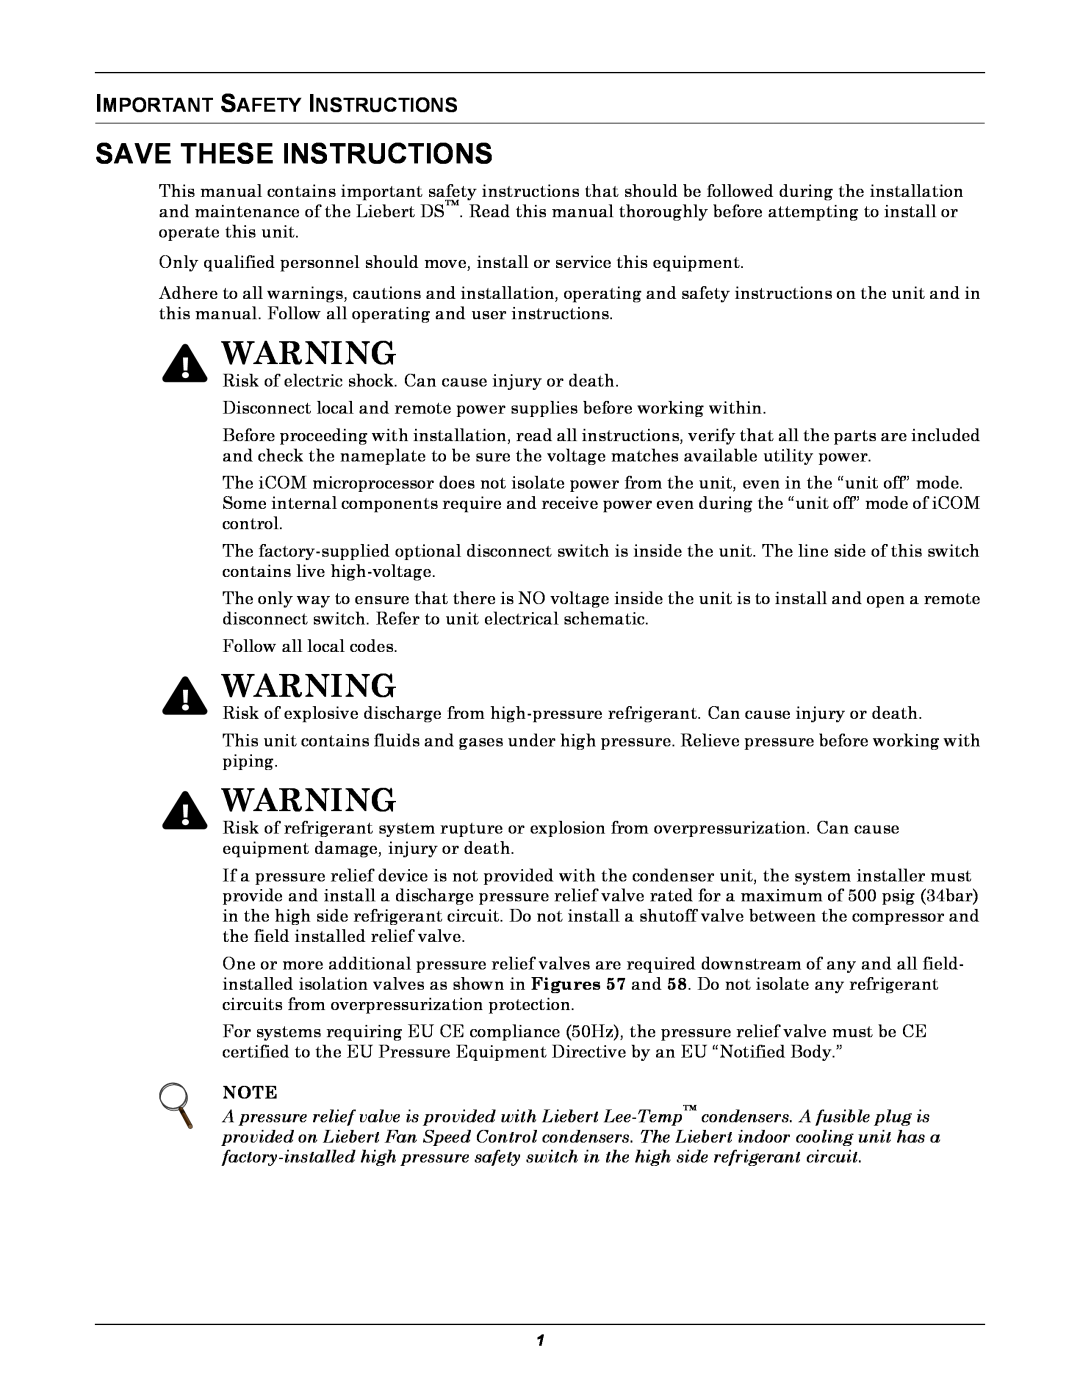 Liebert DS user manual Save These Instructions, Important Safety Instructions 